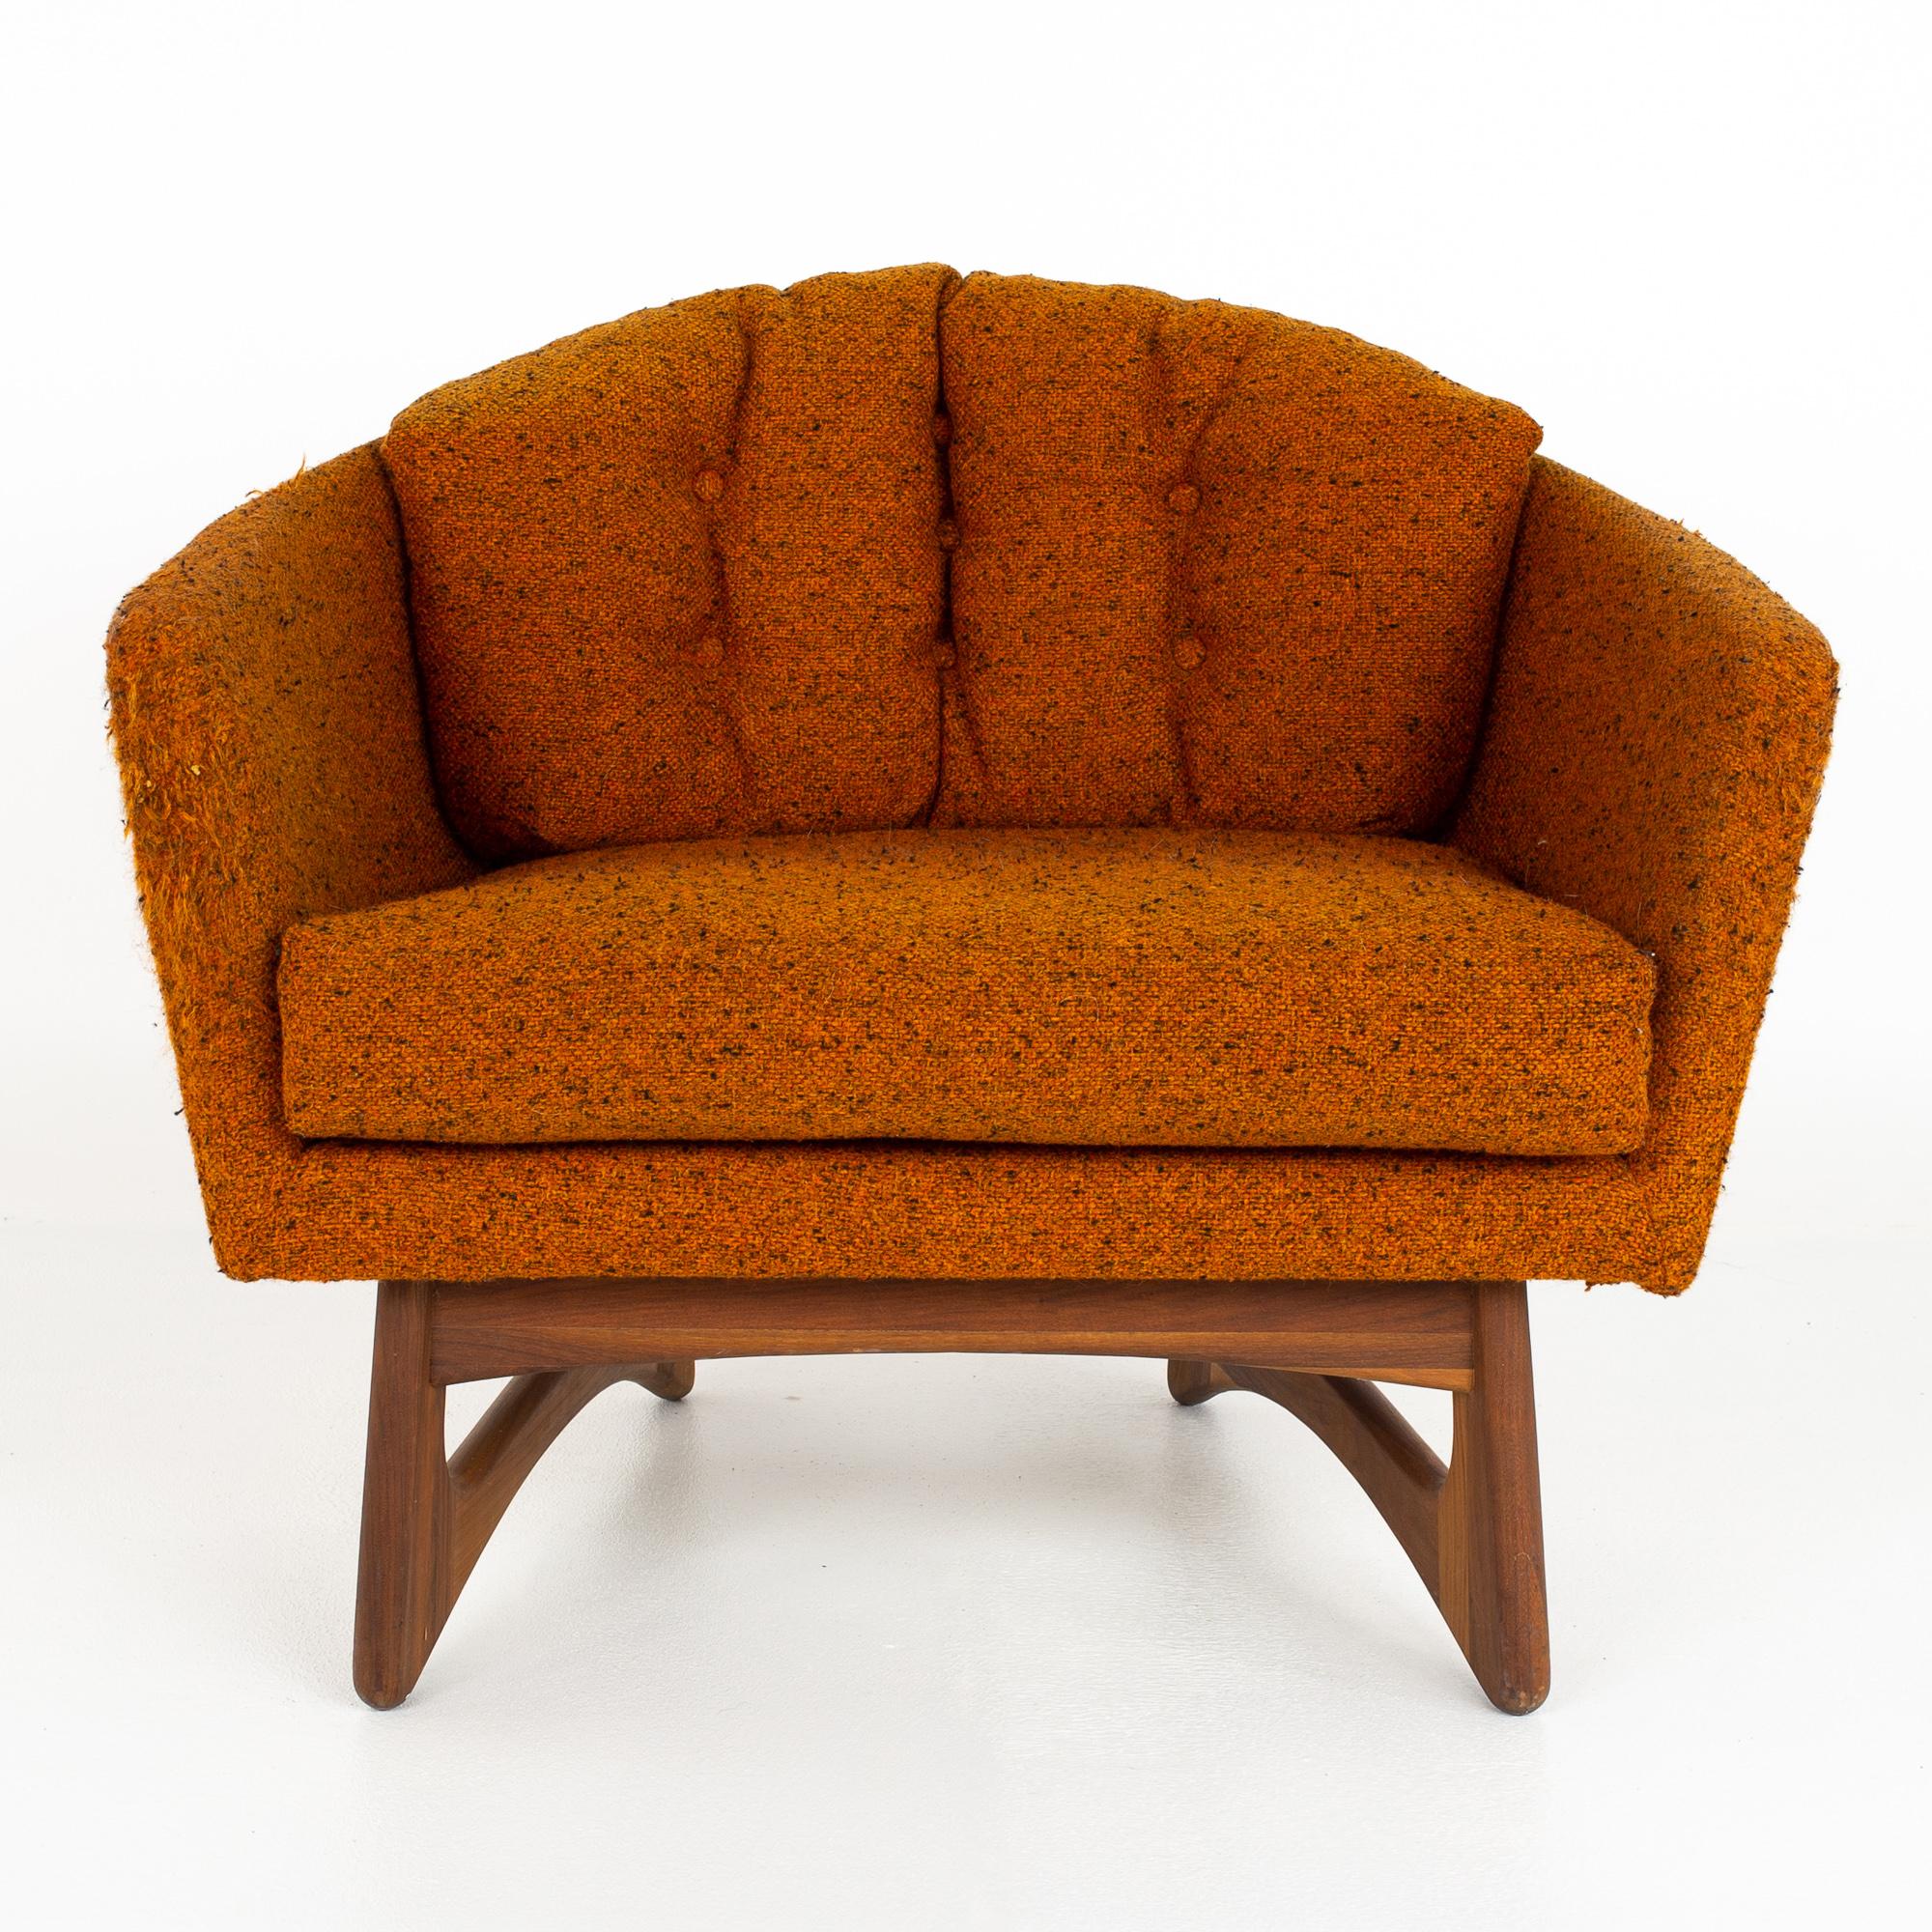 Adrian Pearsall for Craft Associates mid century walnut barrel lounge chair 

Lounge chair measures: 35 wide x 30 deep x 29.5 high, with a seat height of 18 inches and arm height of 24.5 inches

Ready for new upholstery

?All pieces of